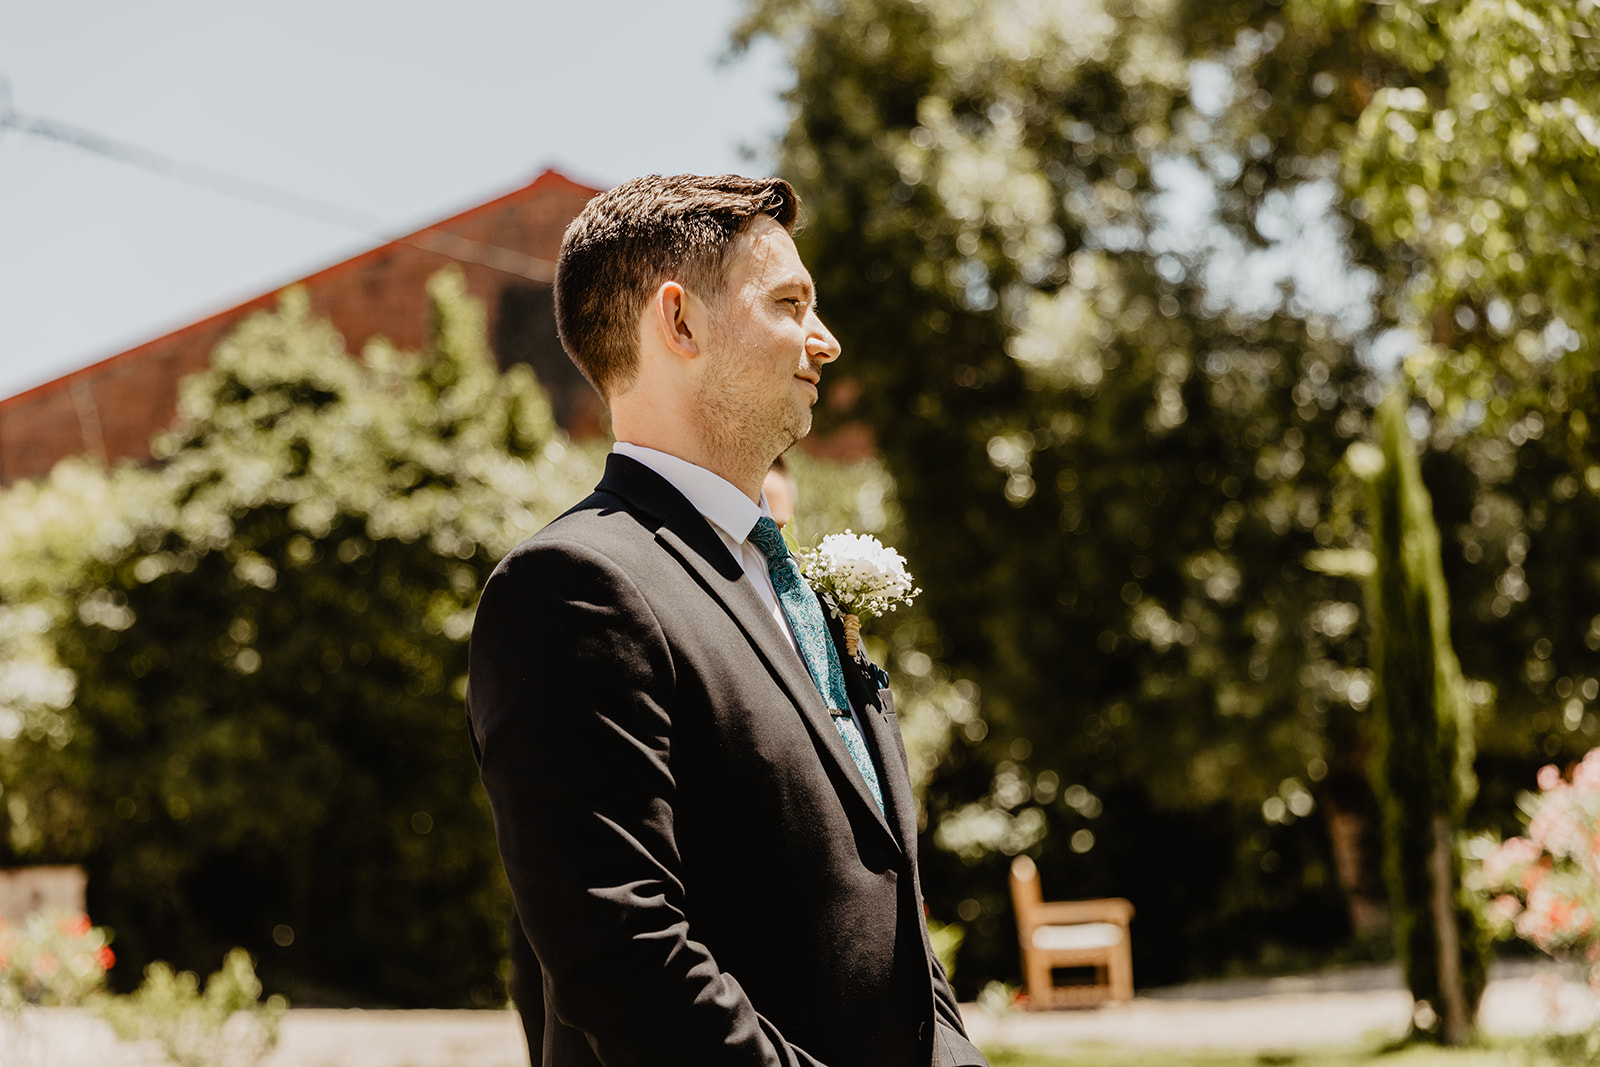 Groom at the top of the aisle at a France Destination Wedding. Photography and Videography by Olive Joy Photography